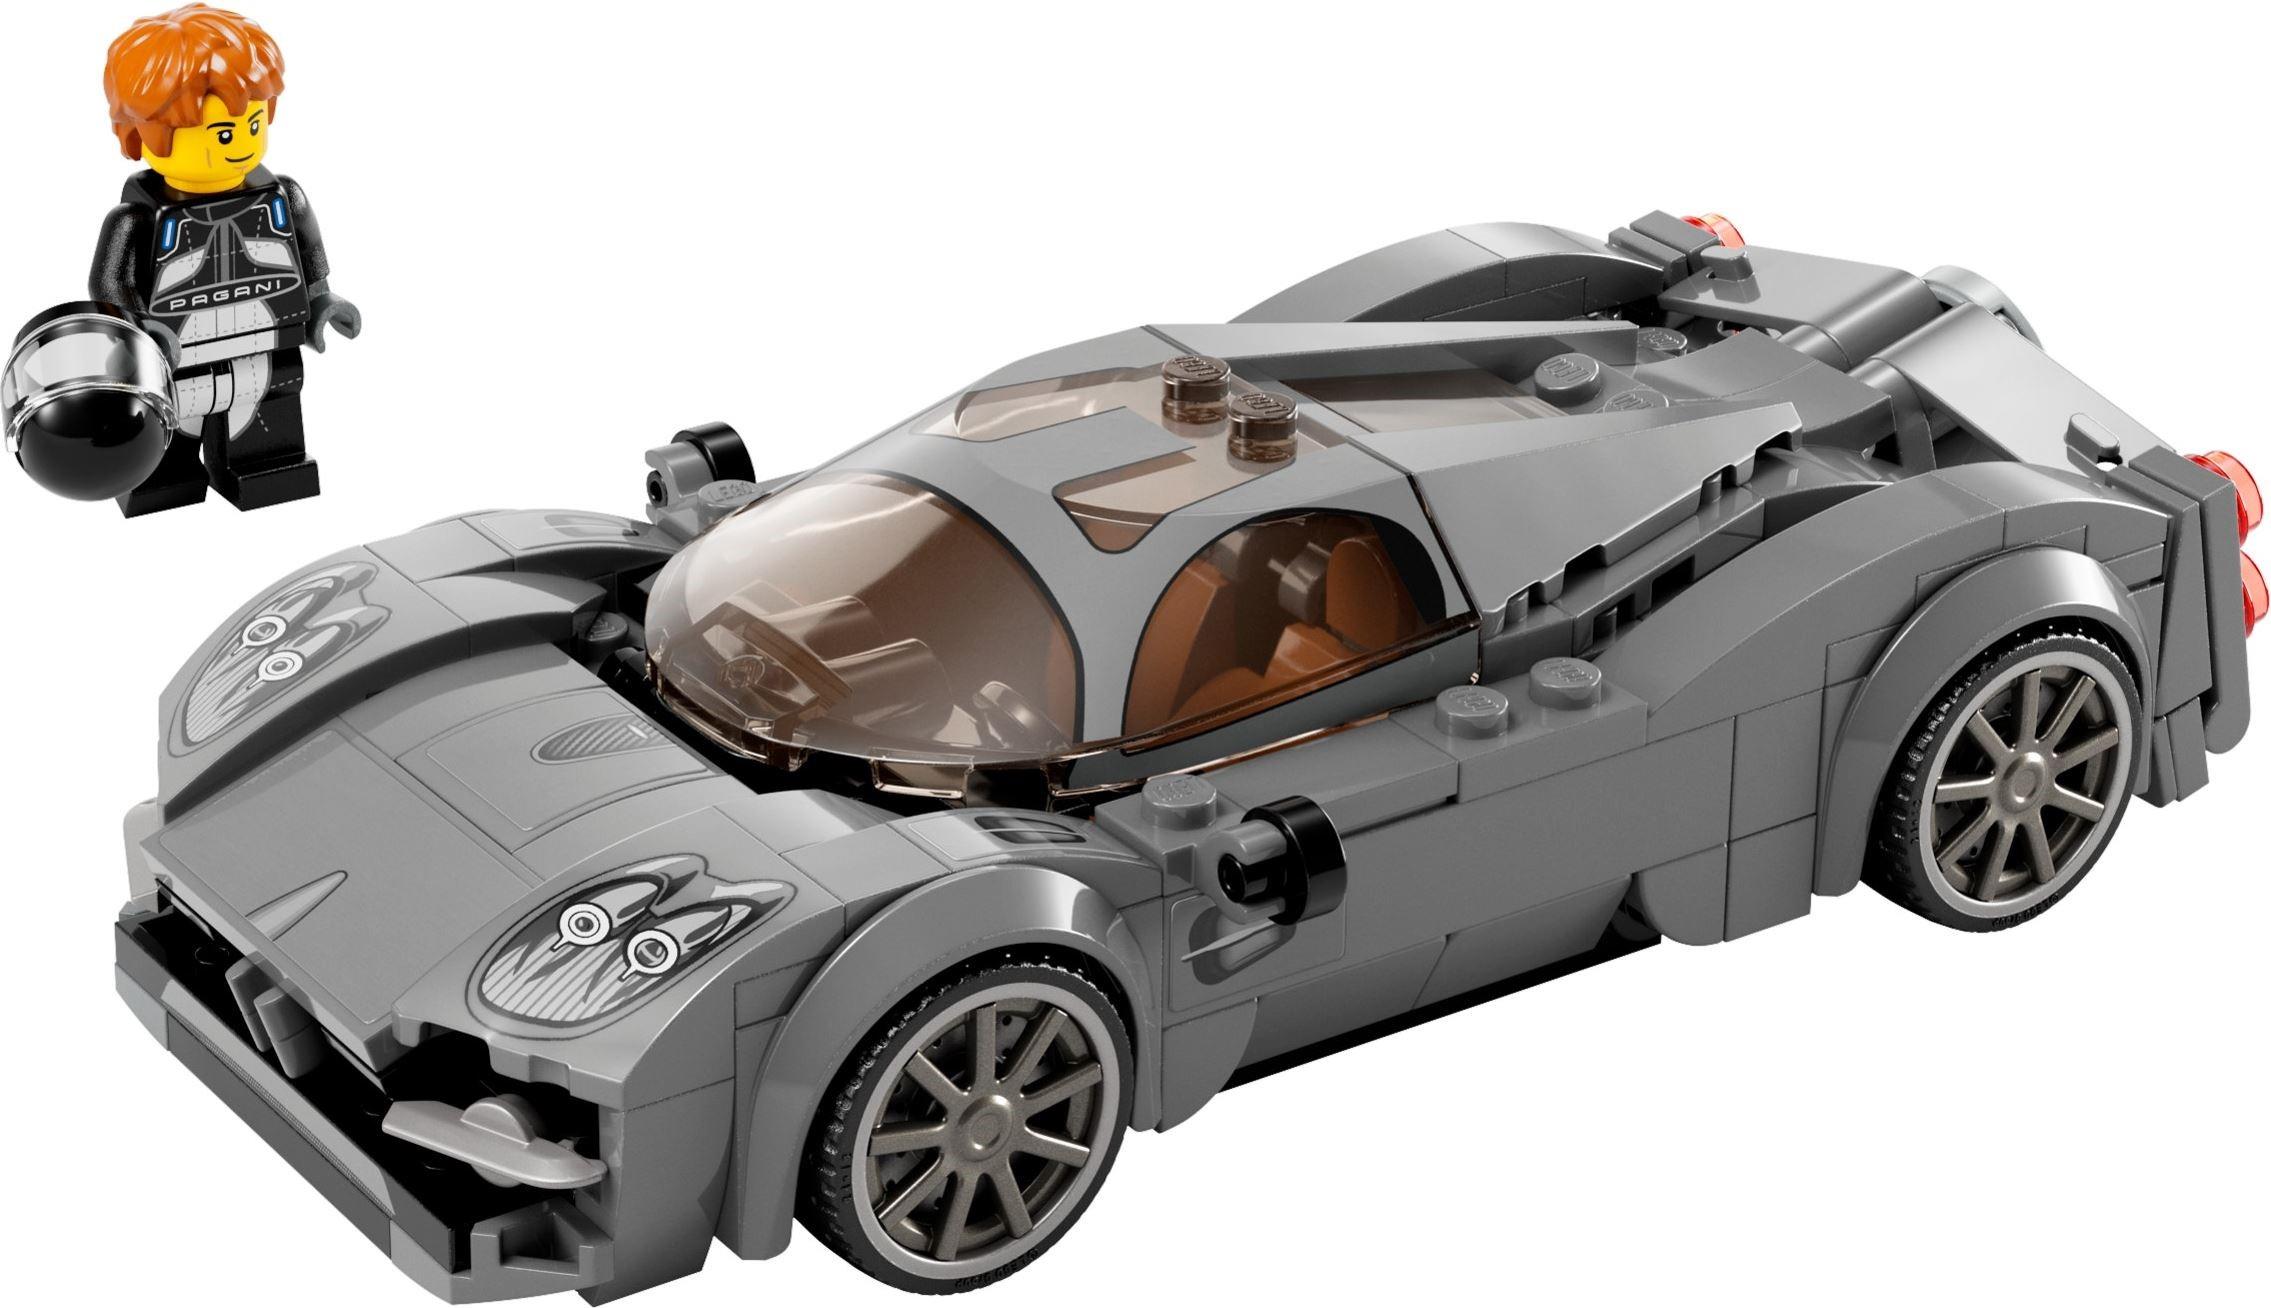 LEGO Speed Champions March 2024 Sets! (4 New Sets, Another Price Increase)  